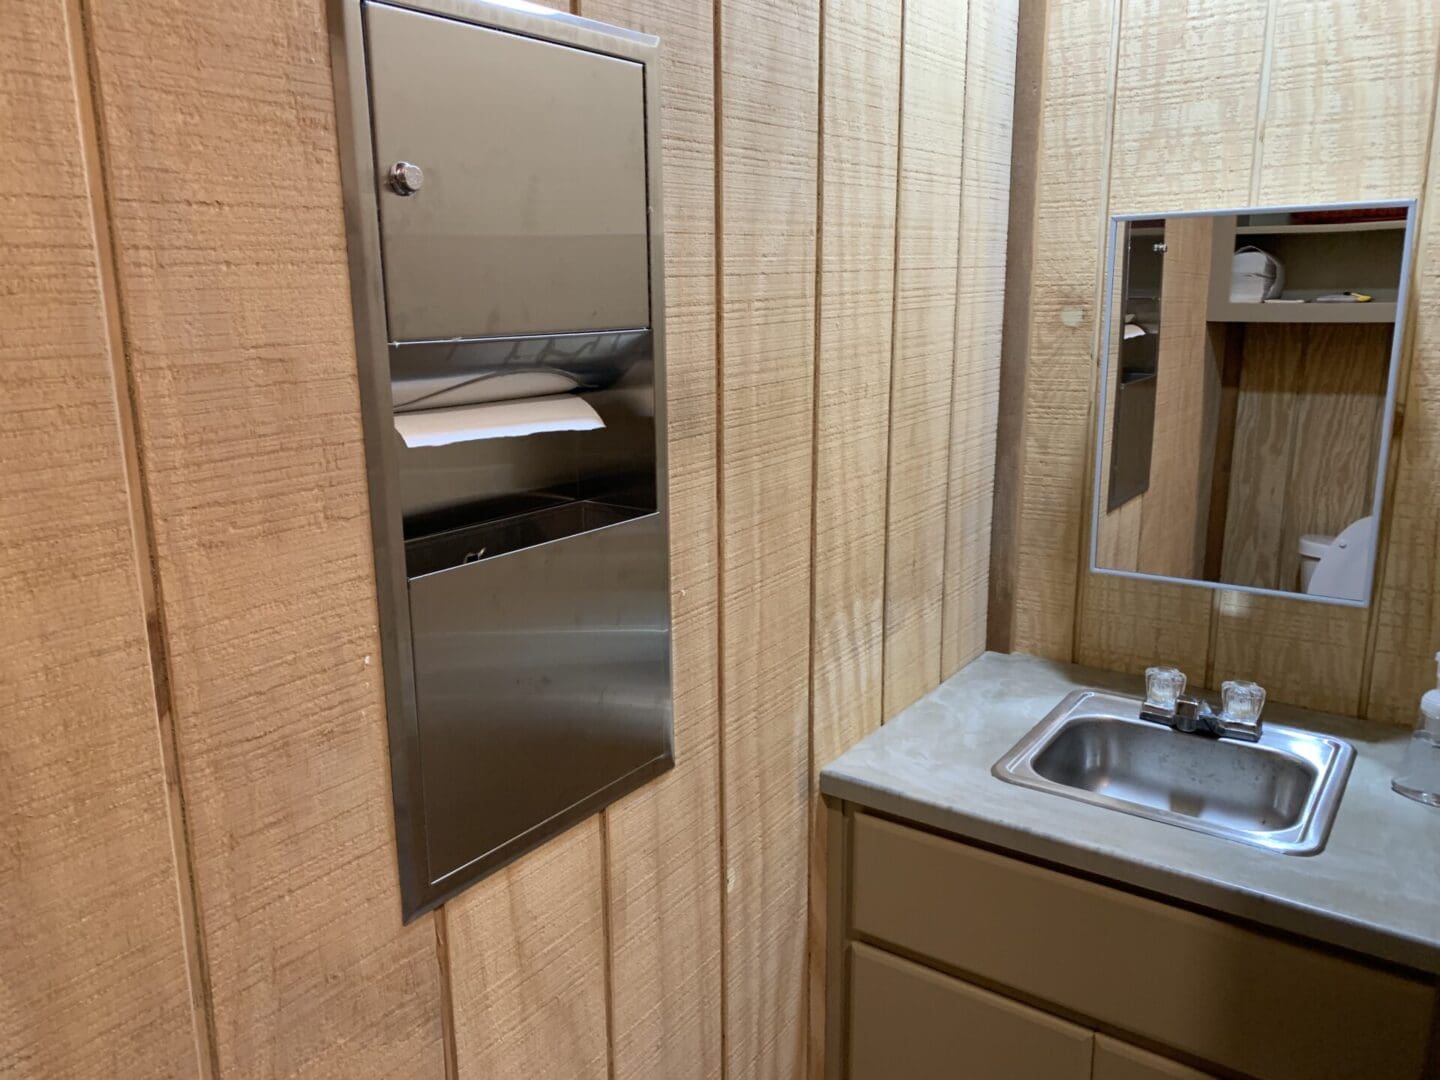 A bathroom with wood paneling and stainless steel fixtures.